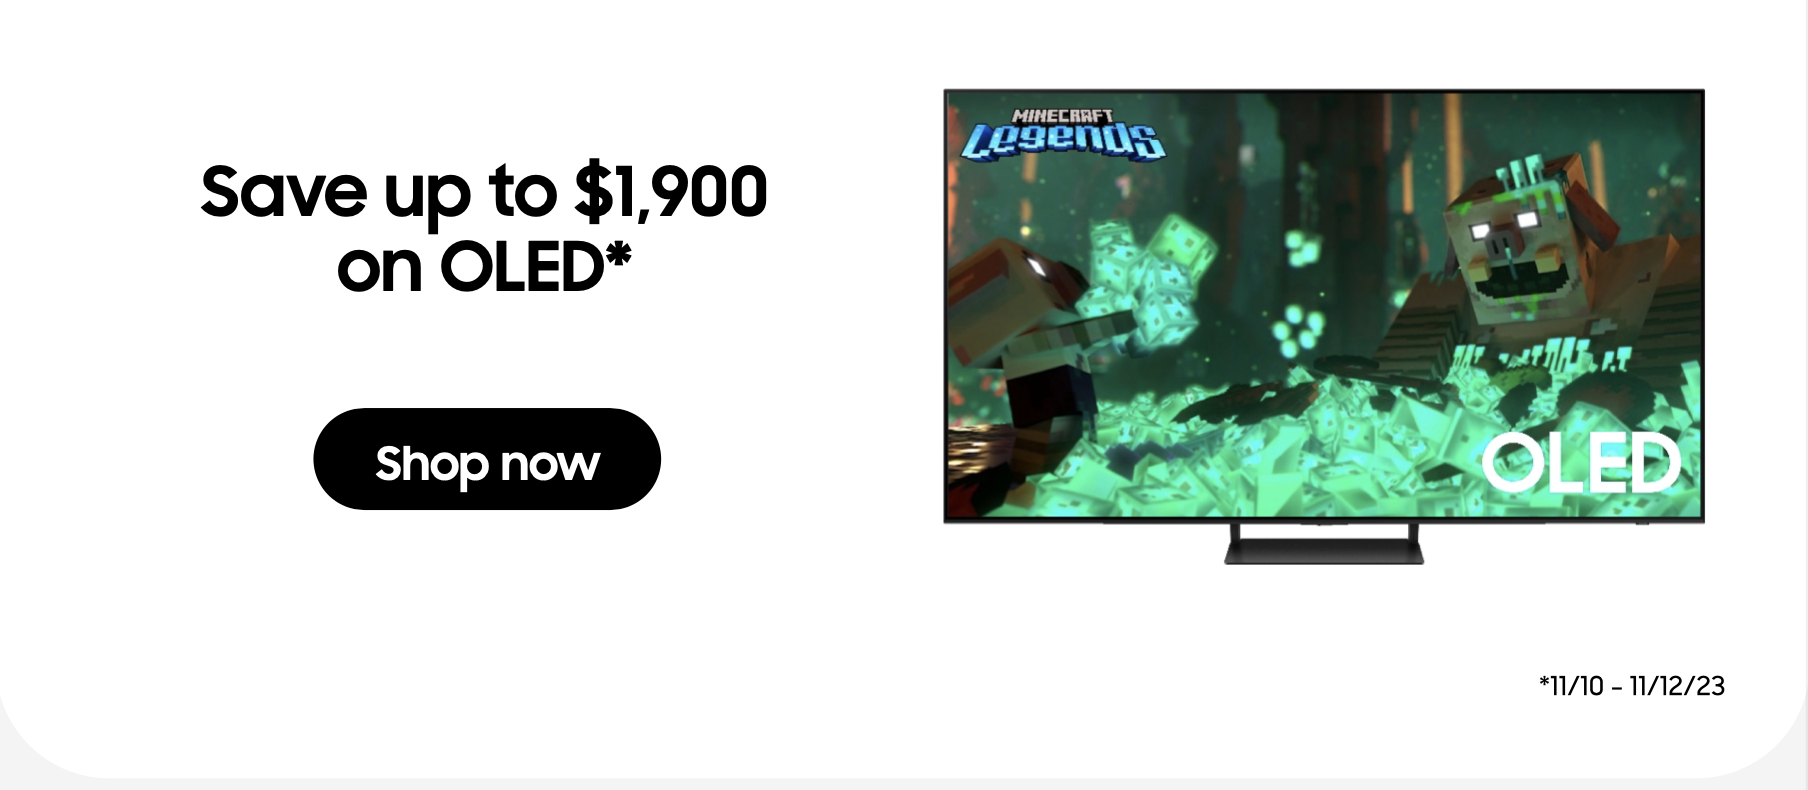 Save up to $1,900 on OLED*